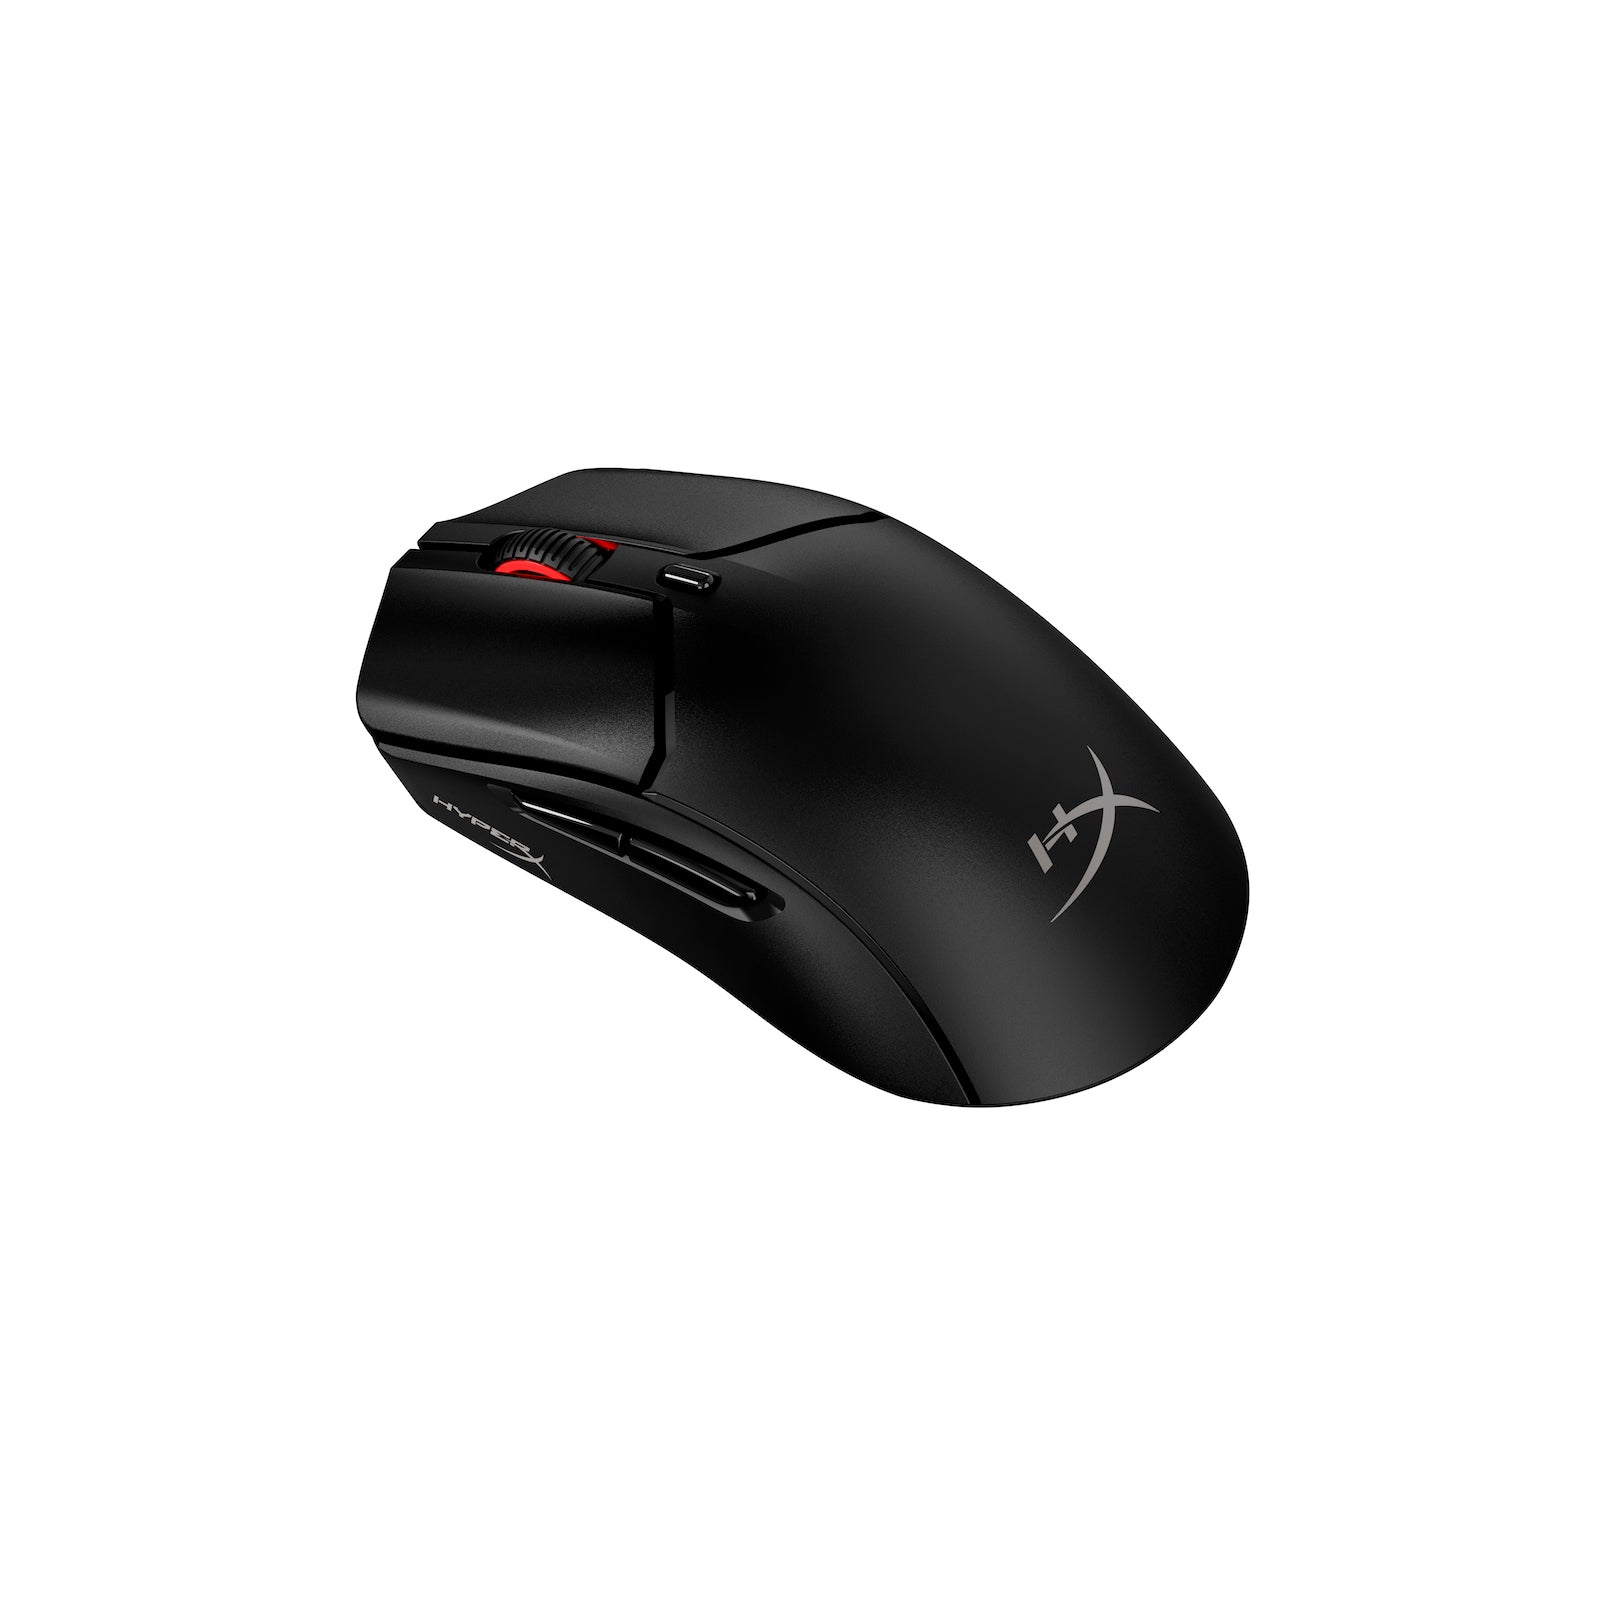 HyperX Pulsefire Haste 2 Wireless Black Gaming Mouse -  angled view from the right side